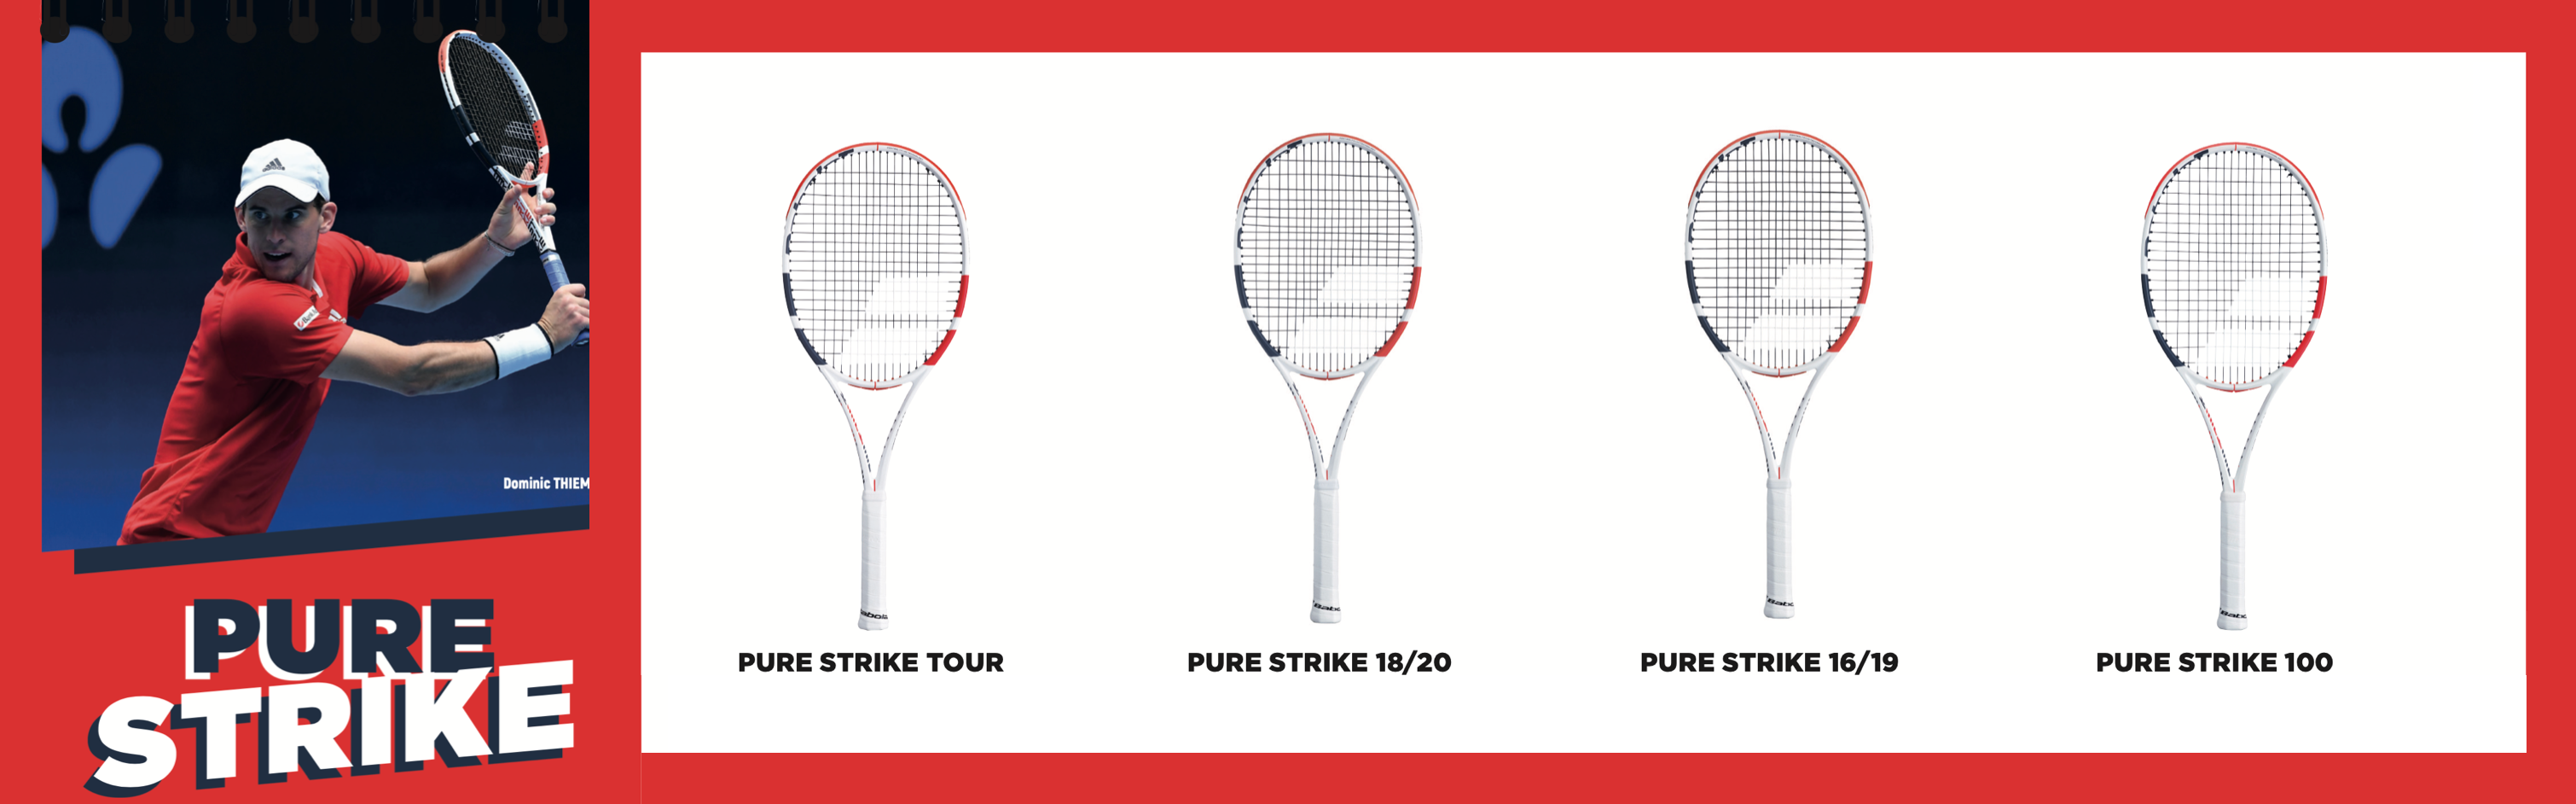 Babolat Pure Strike Racquets Racquet Point